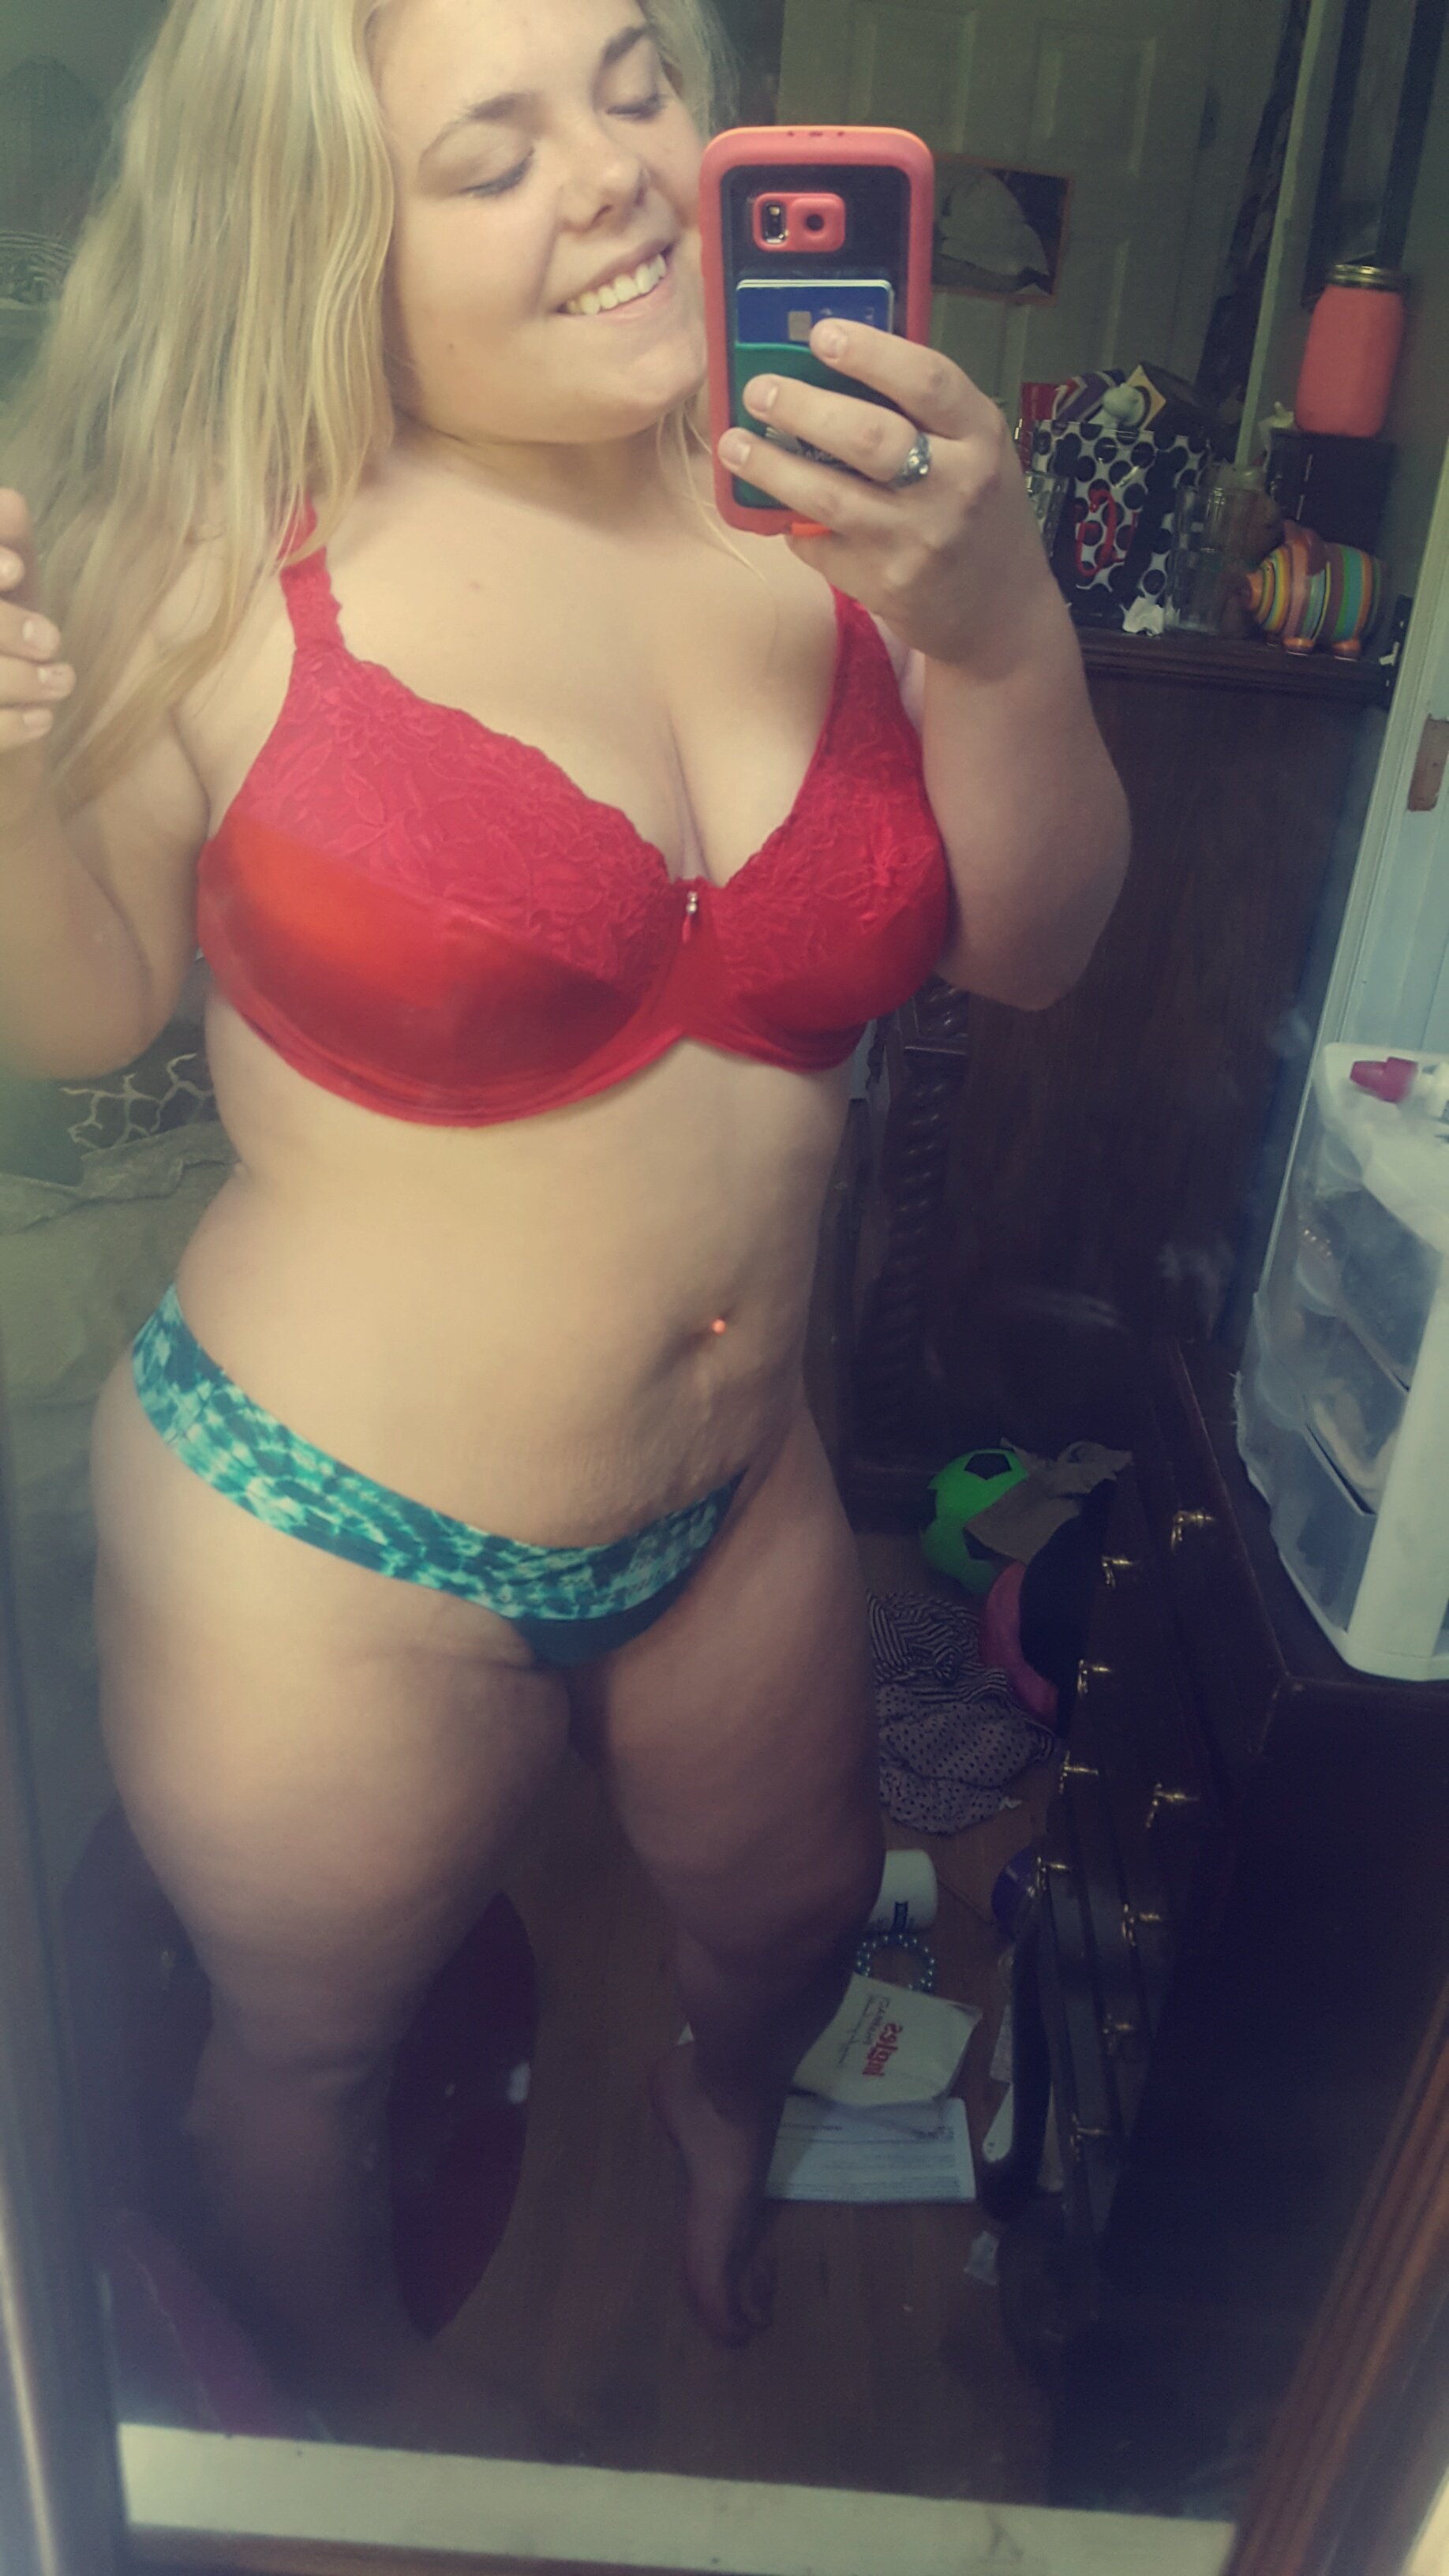 (F)irst time posting here, play nice? 